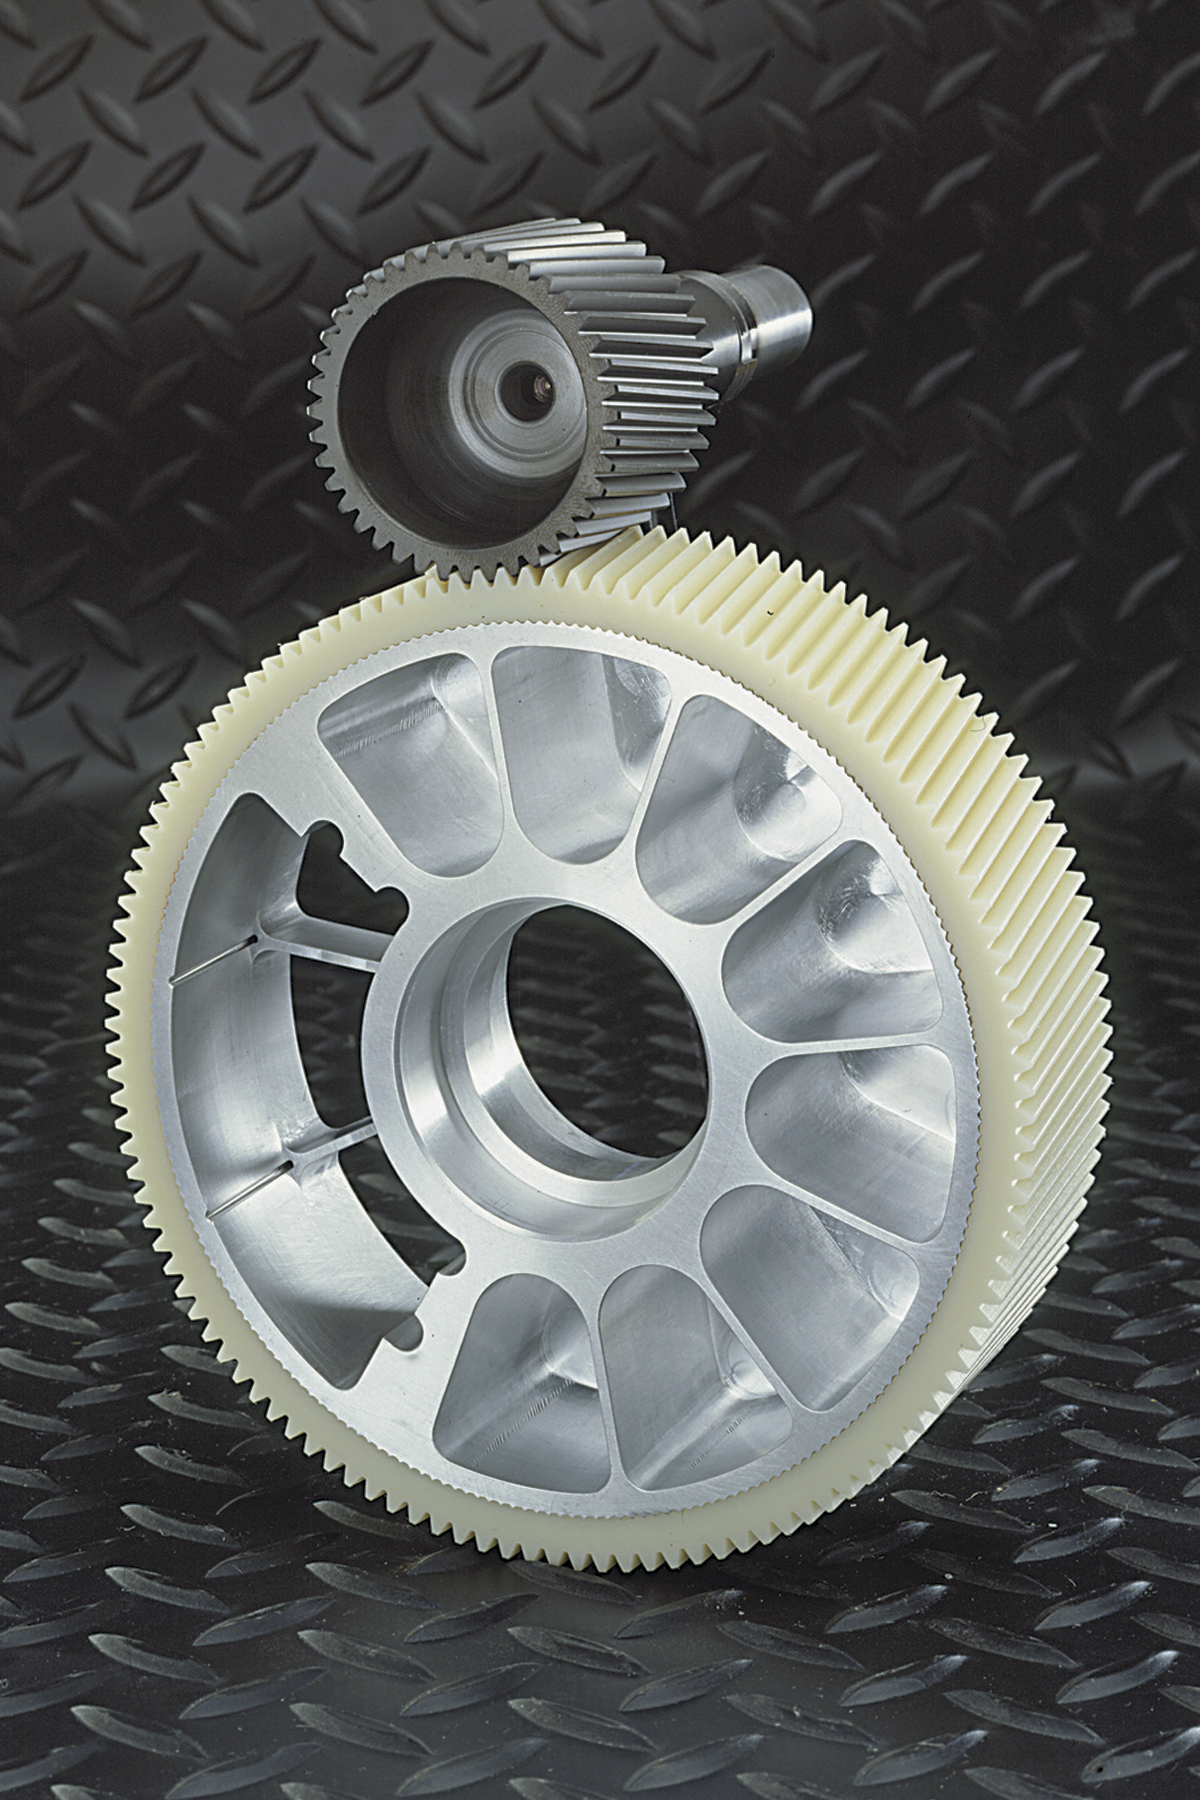 These are self-lubricating metal-core gears from Intech for applications with frequent start-and-stop stop cycles and high torque that need power-transmission components to resist shock.